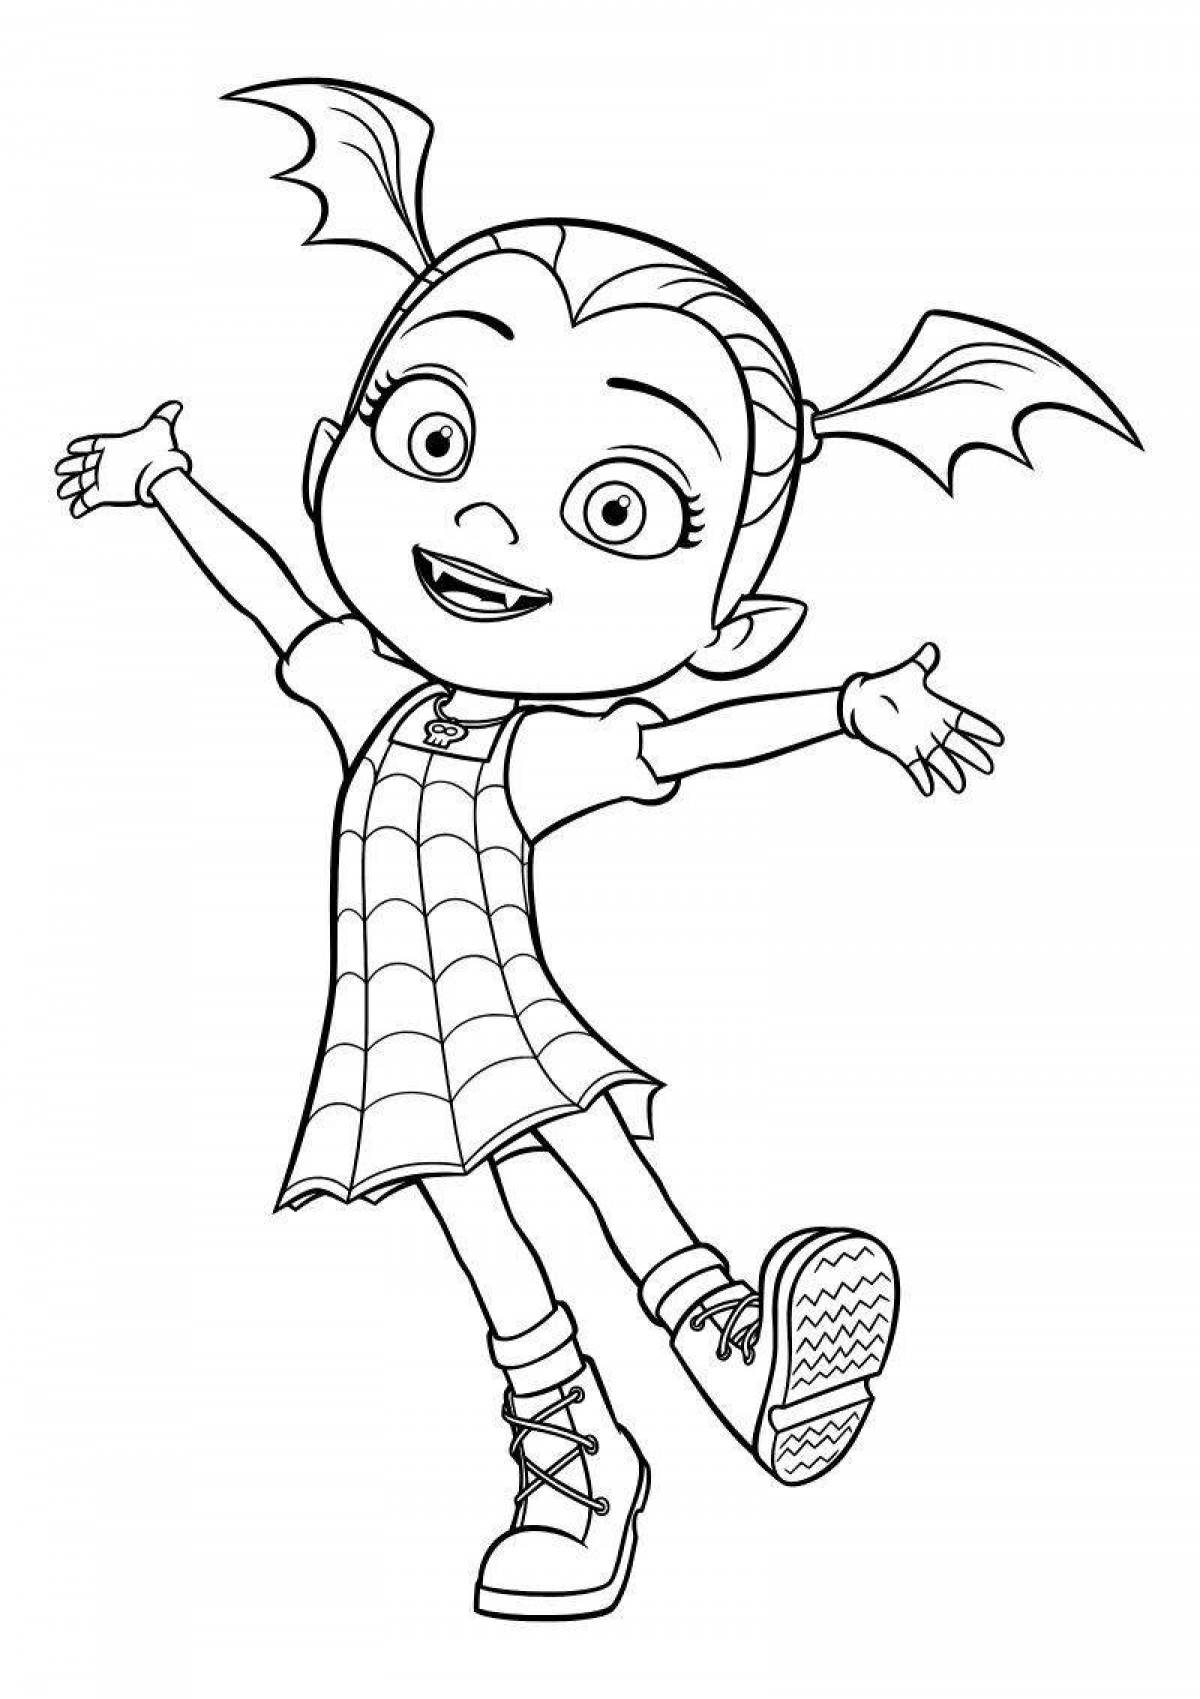 Exquisite amazing vee coloring page